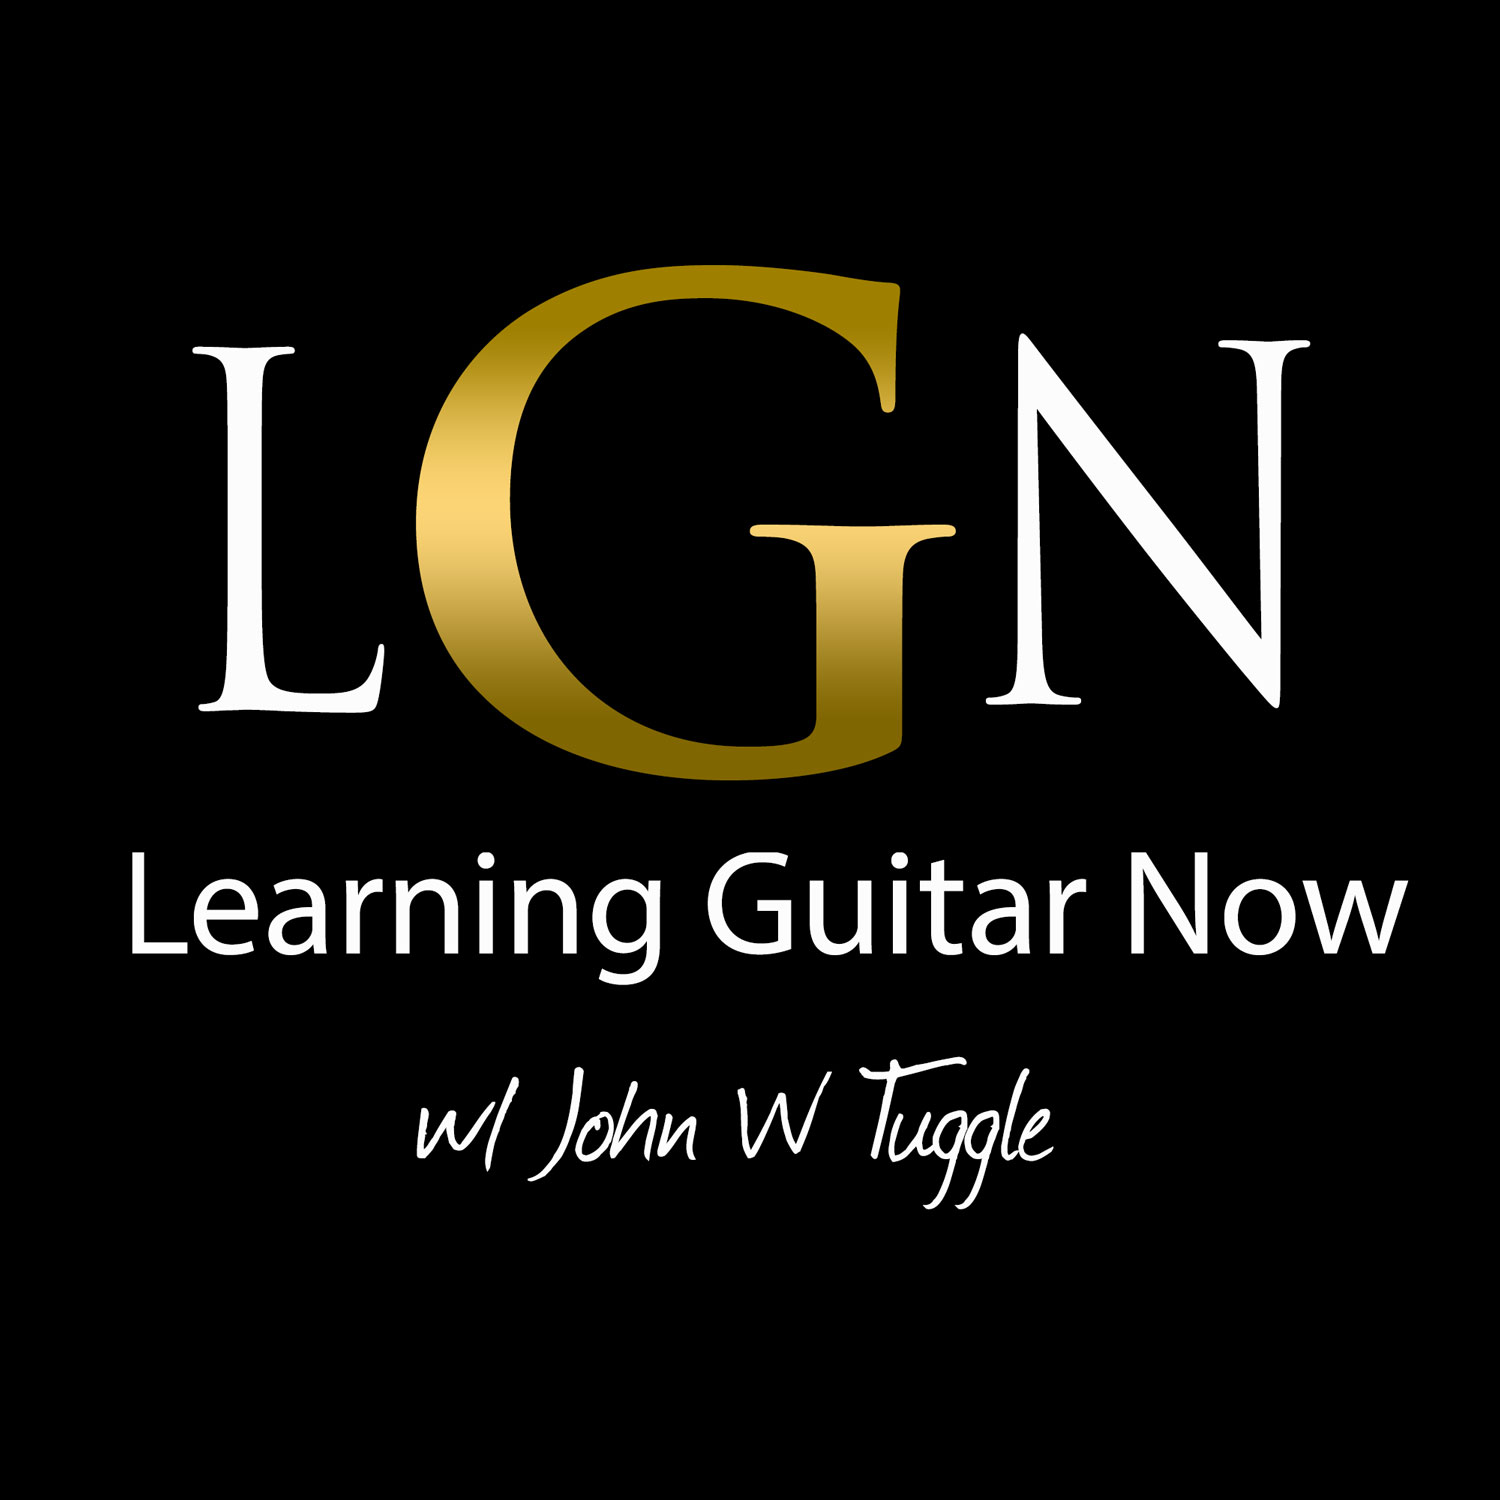 Learning Guitar Now: Learn blues guitar and slide guitar with these easy to follow guitar lessons fr